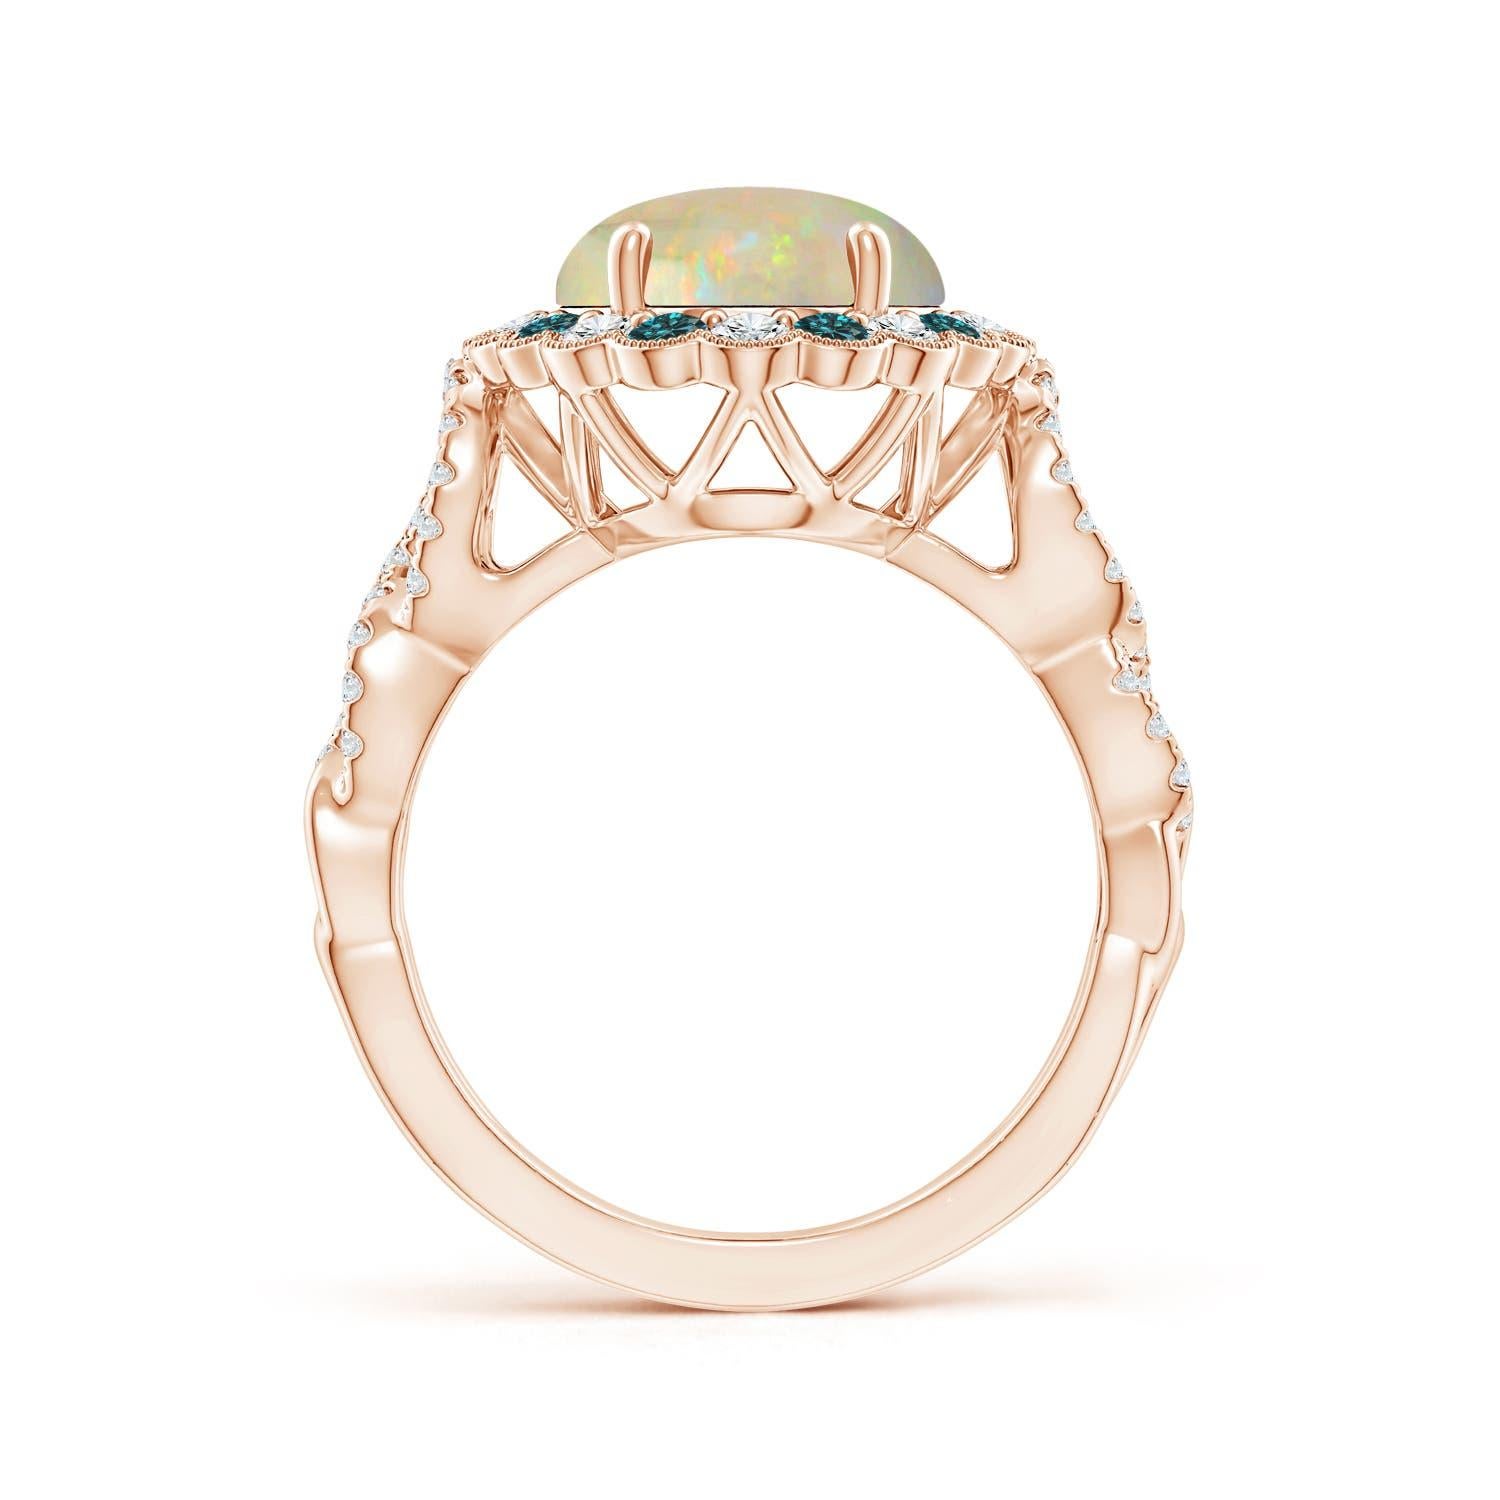 For Sale:  Angara Gia Certified Natural Opal Ring in Rose Gold with Blue & White Diamonds 2